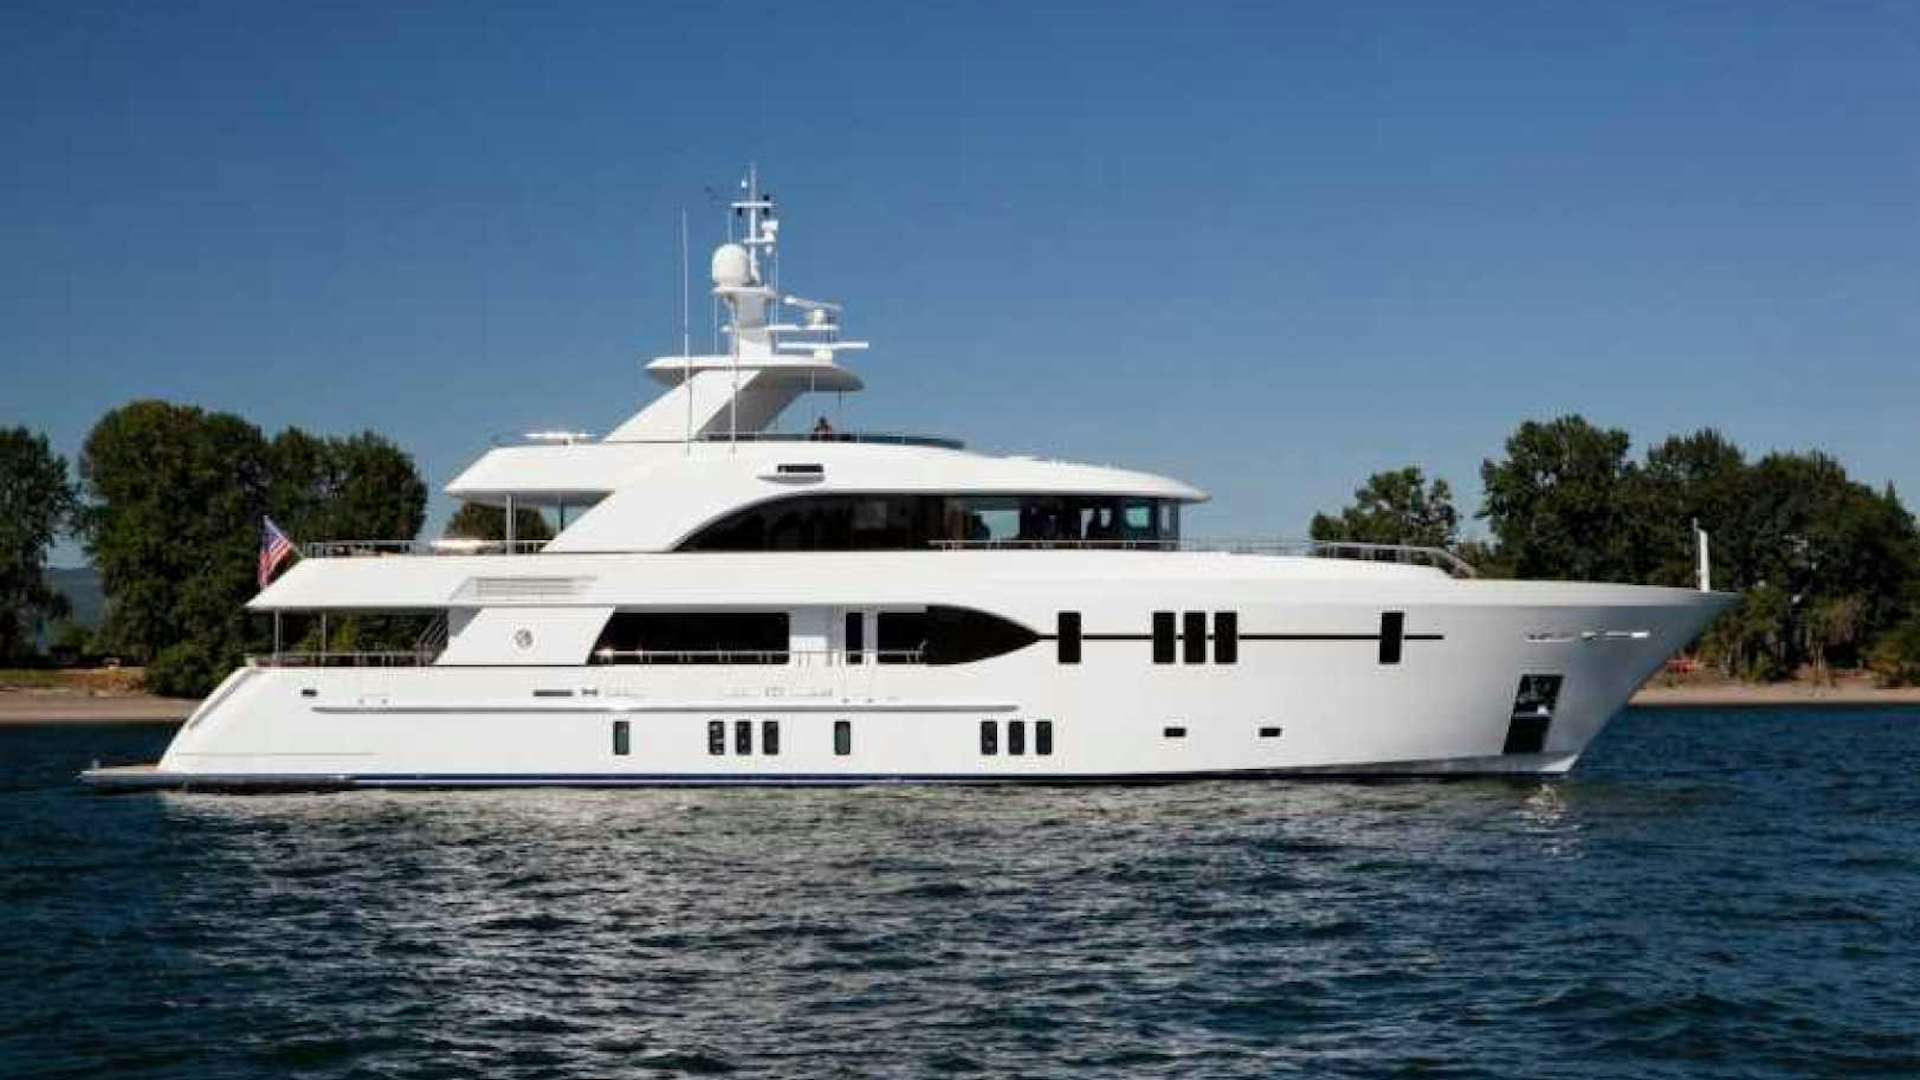 Watch Video for DREAM WEAVER Yacht for Sale